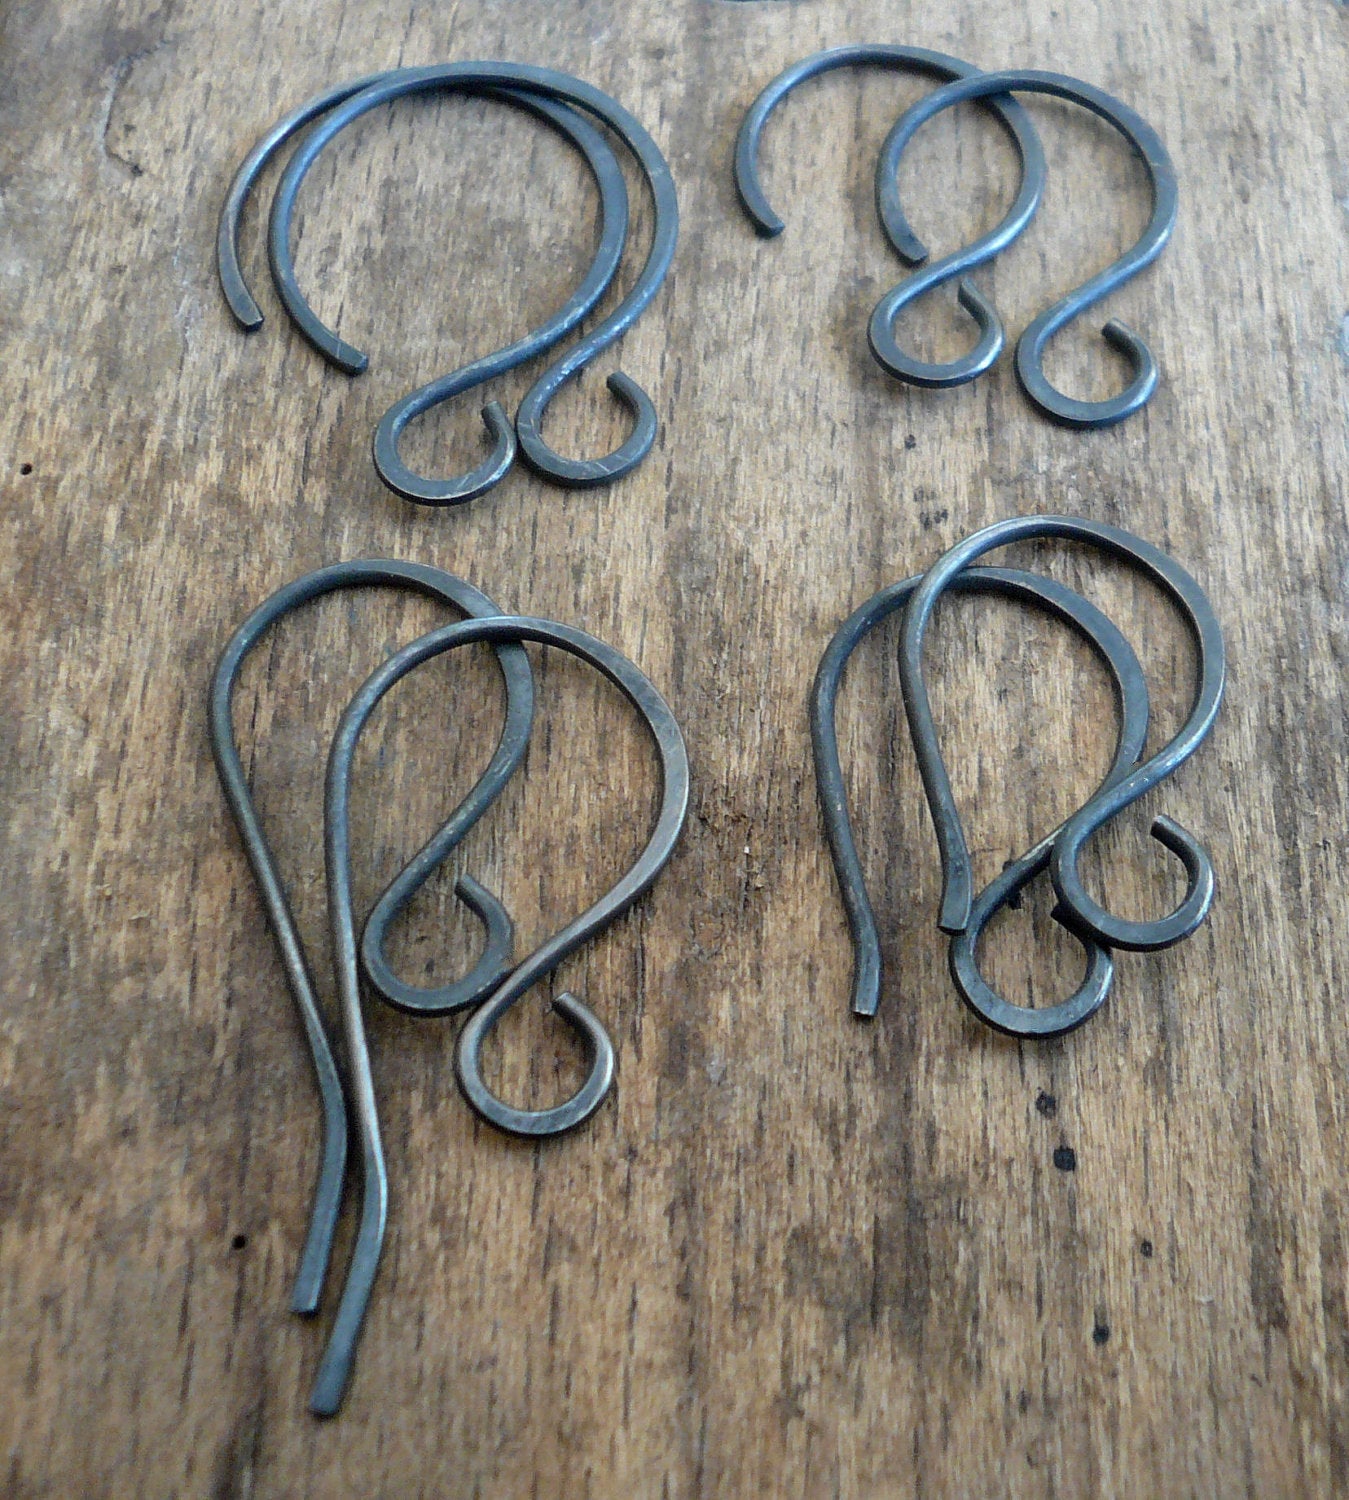 Sample Pack 4 pairs of my Sterling Silver Earwires - Handmade. Handforged. Heavily Oxidized